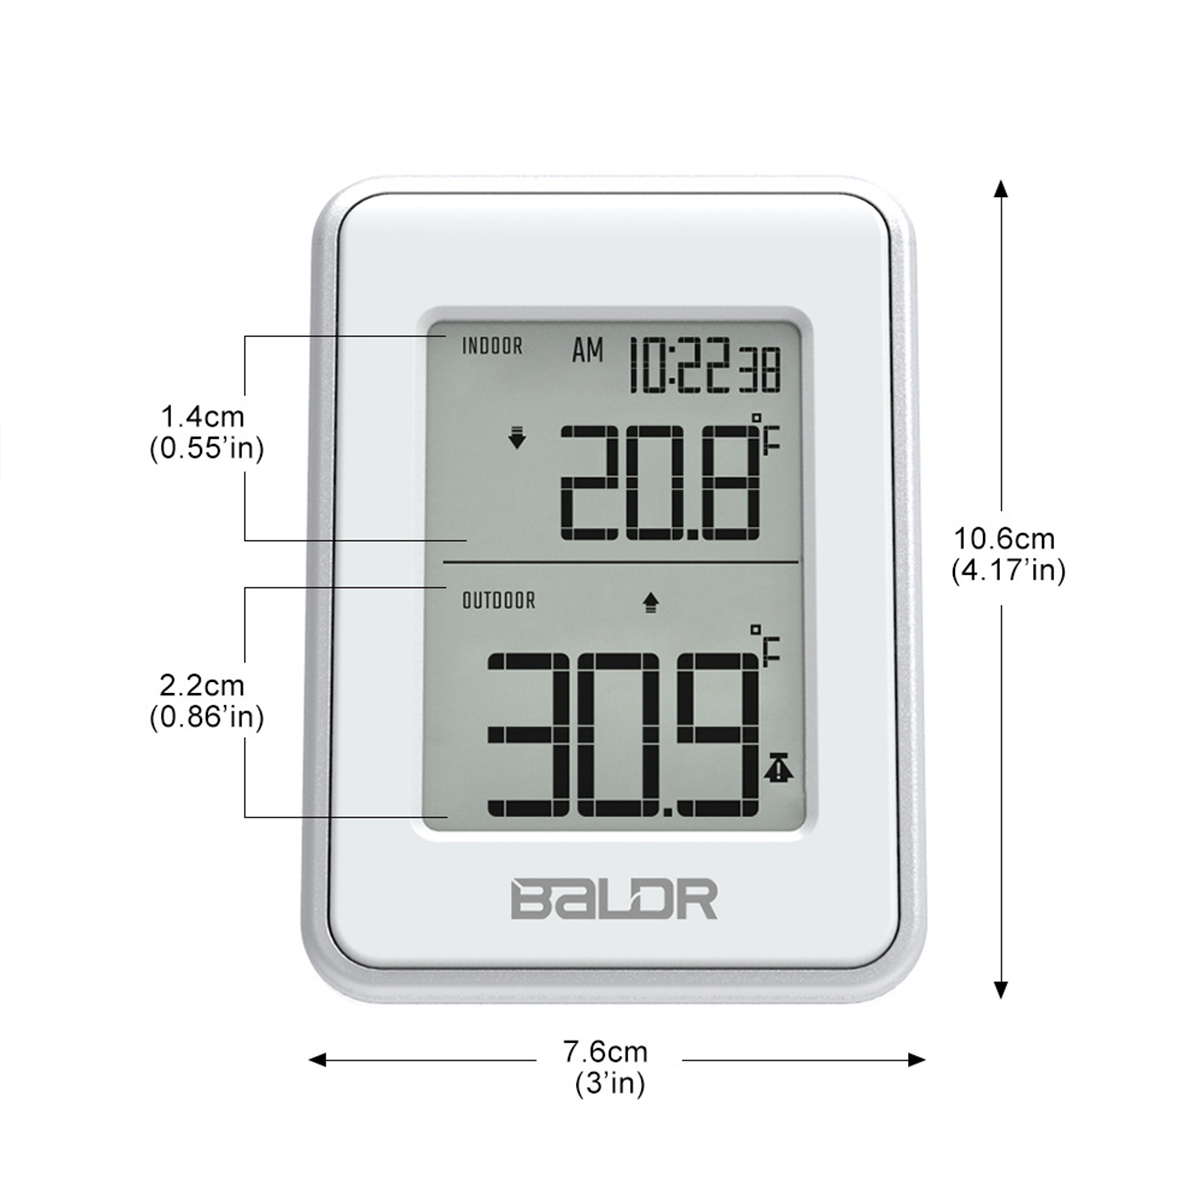 LCD-Display-Digital-Wireless-Indoor-Outdoor-Temperature-Thermometer-1652930-5